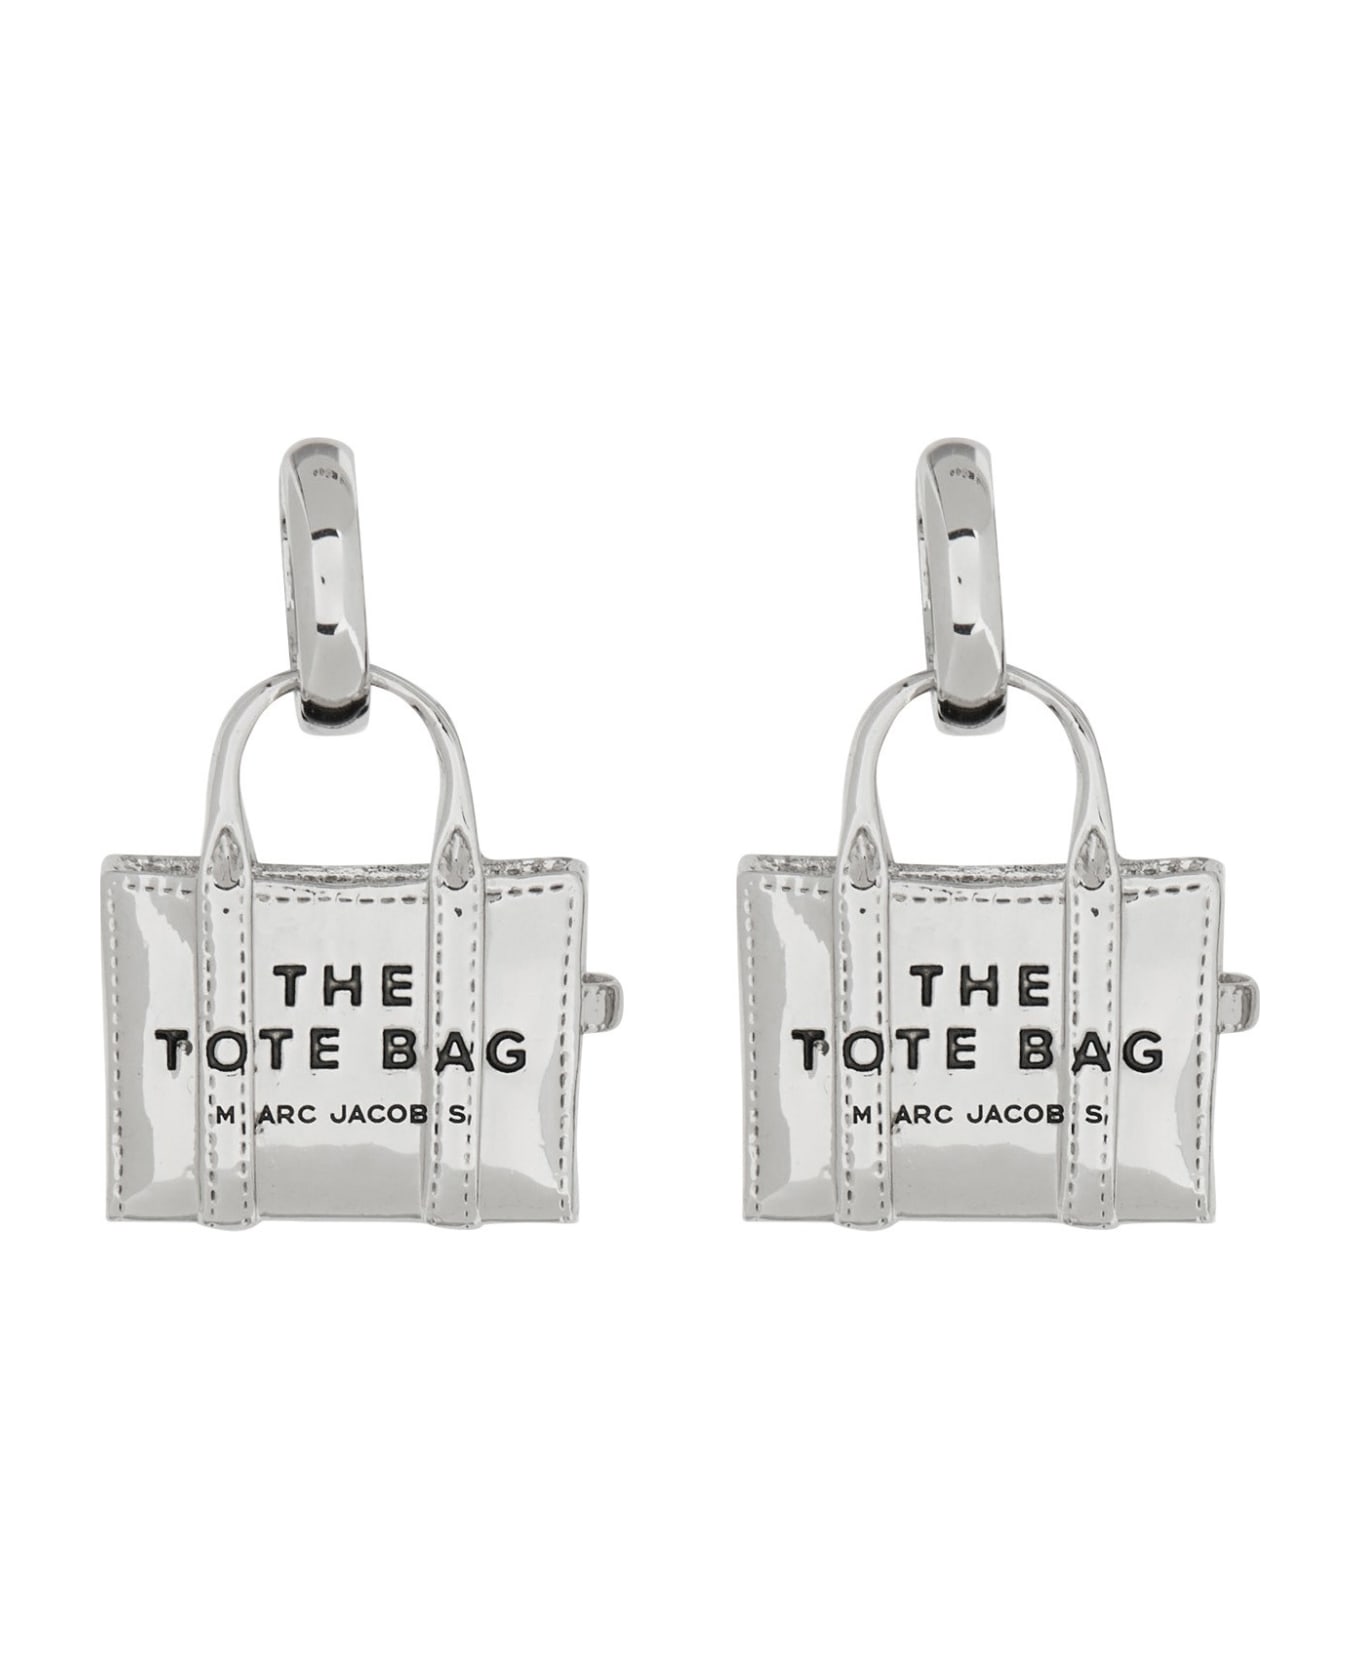 Marc Jacobs The Tote Bag Earrings - ARGENTO イヤリング